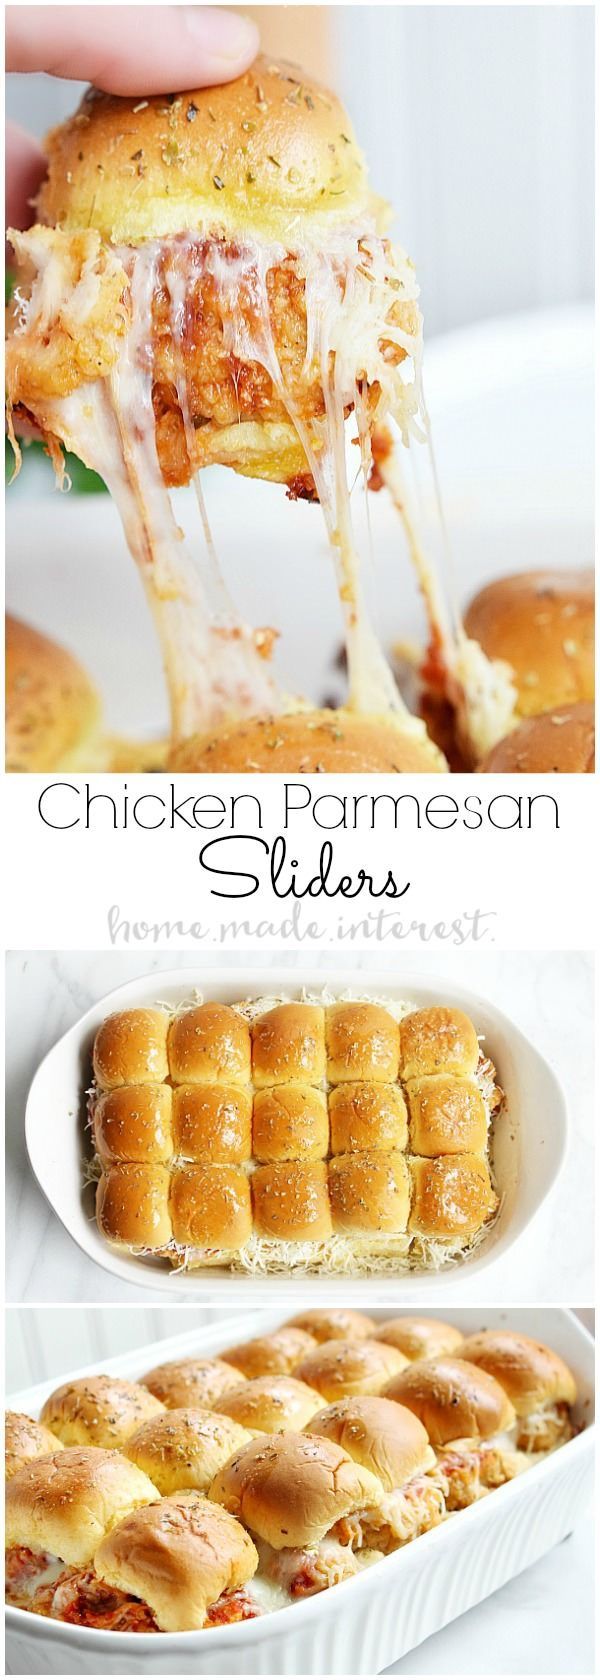 These Chicken Parmesan Sliders are an easy recipe made with fried chicken tenders,